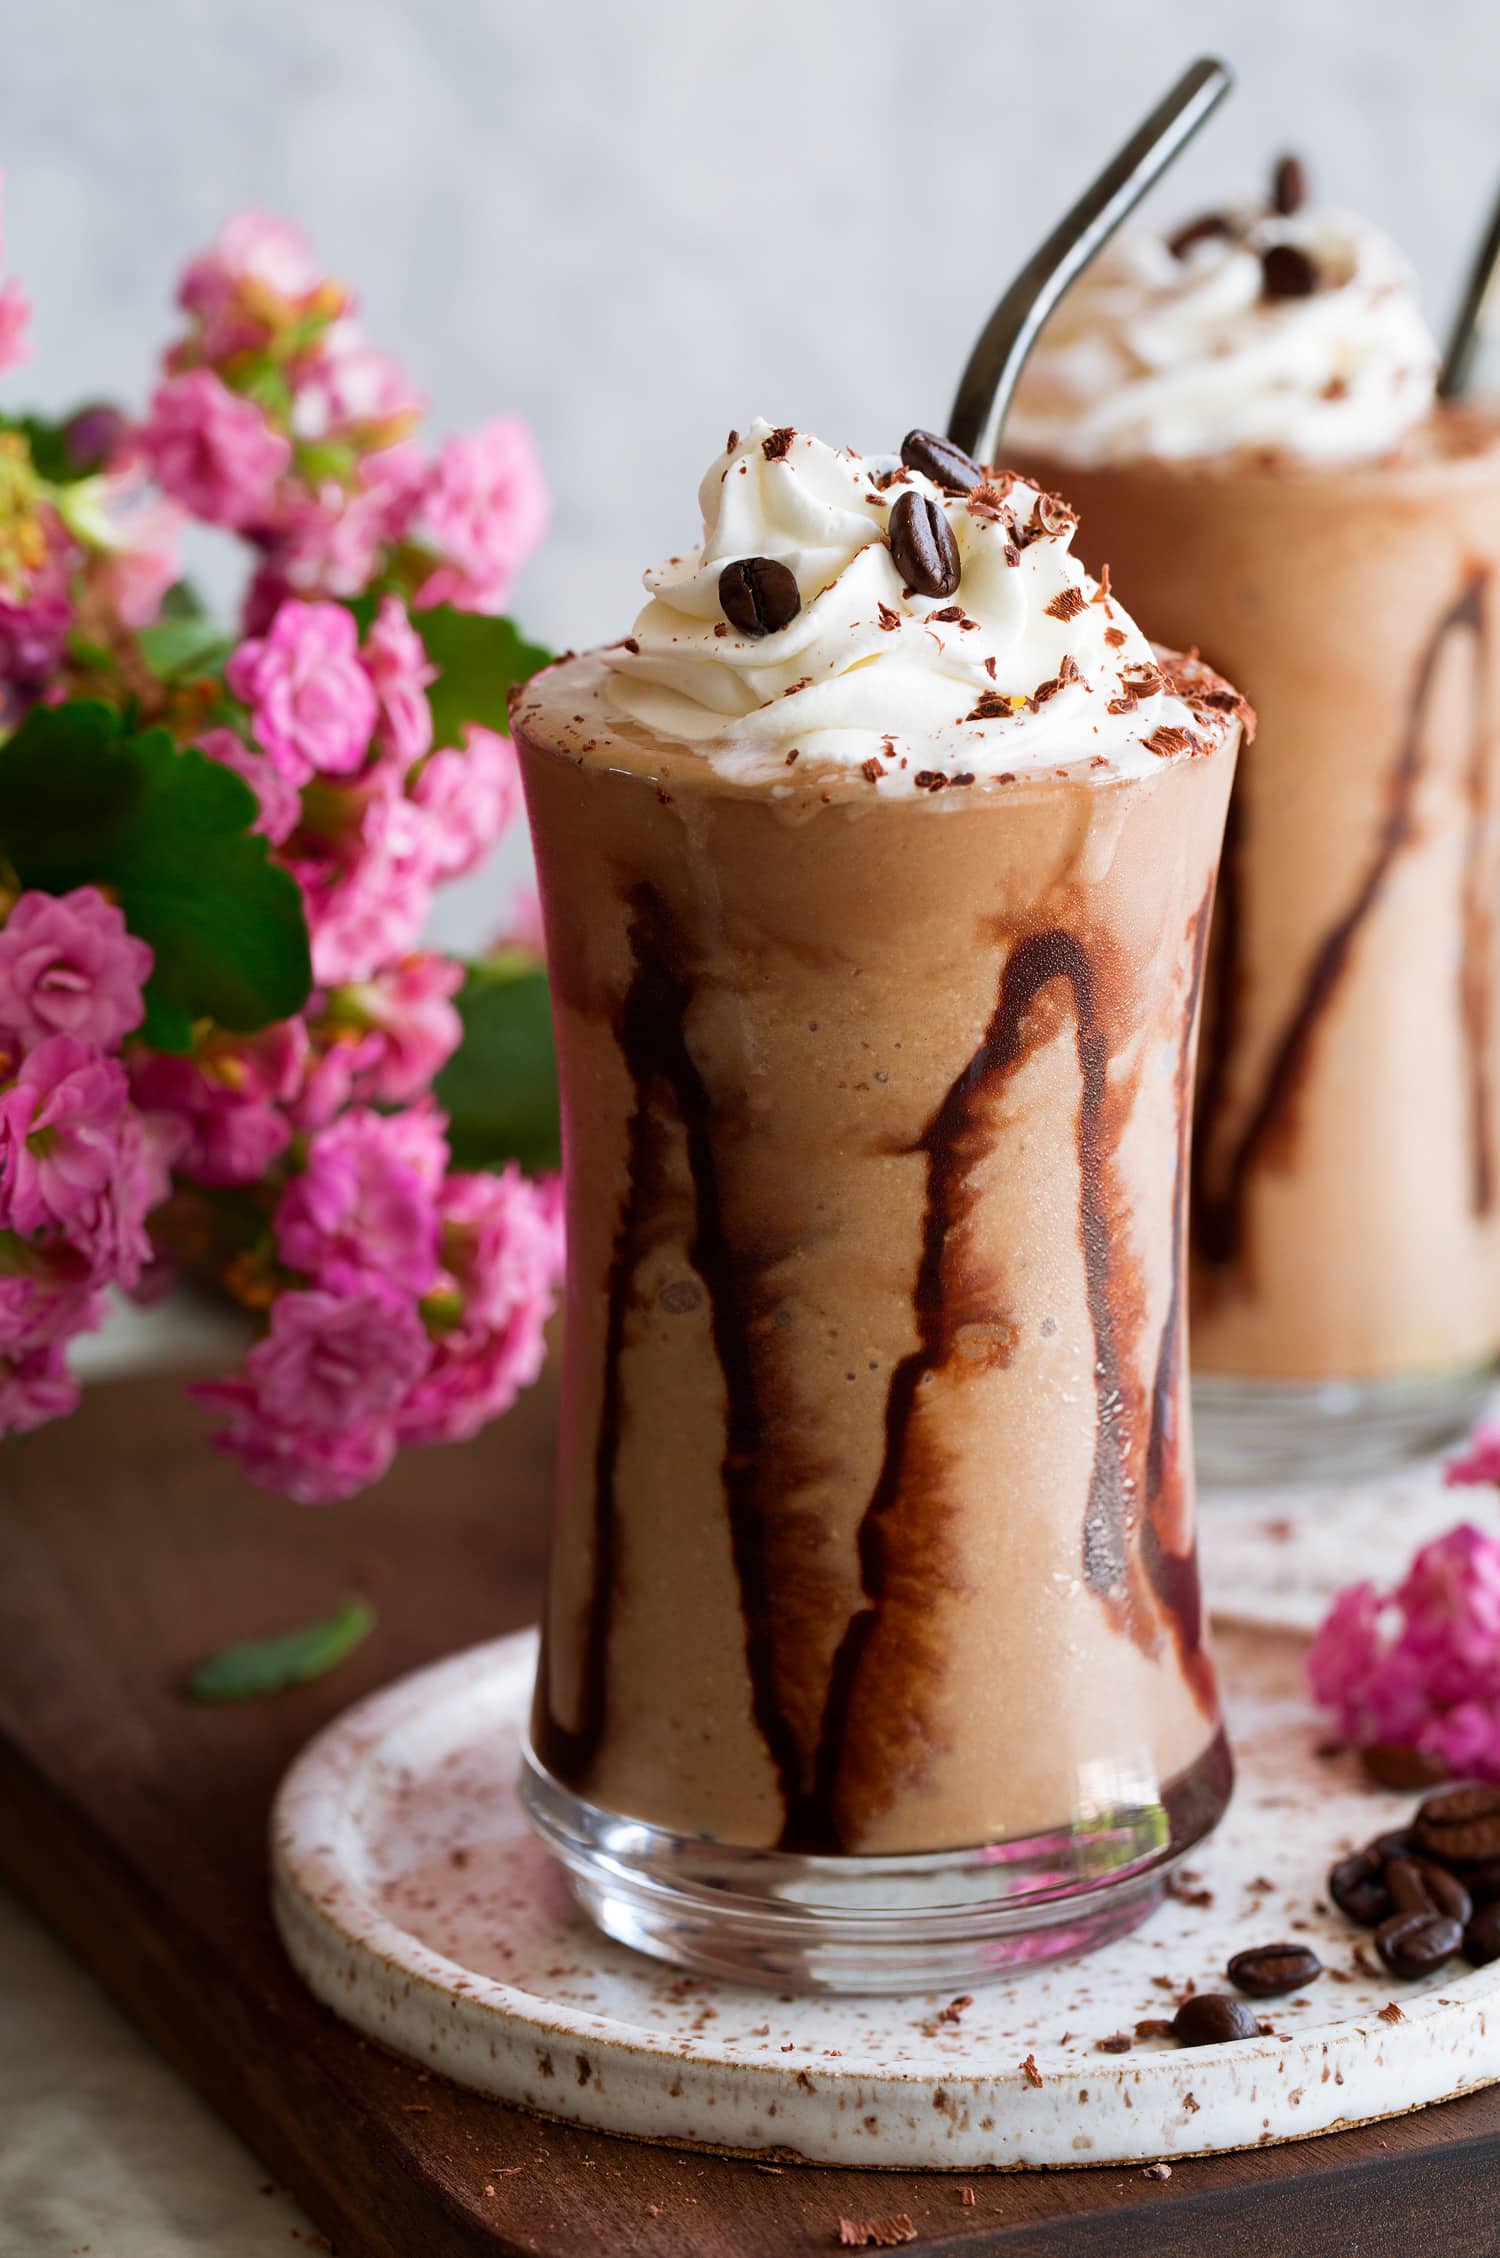 Close up photo of coffee smoothie with streaks of chocolate sauce on glass and whipped cream topping.